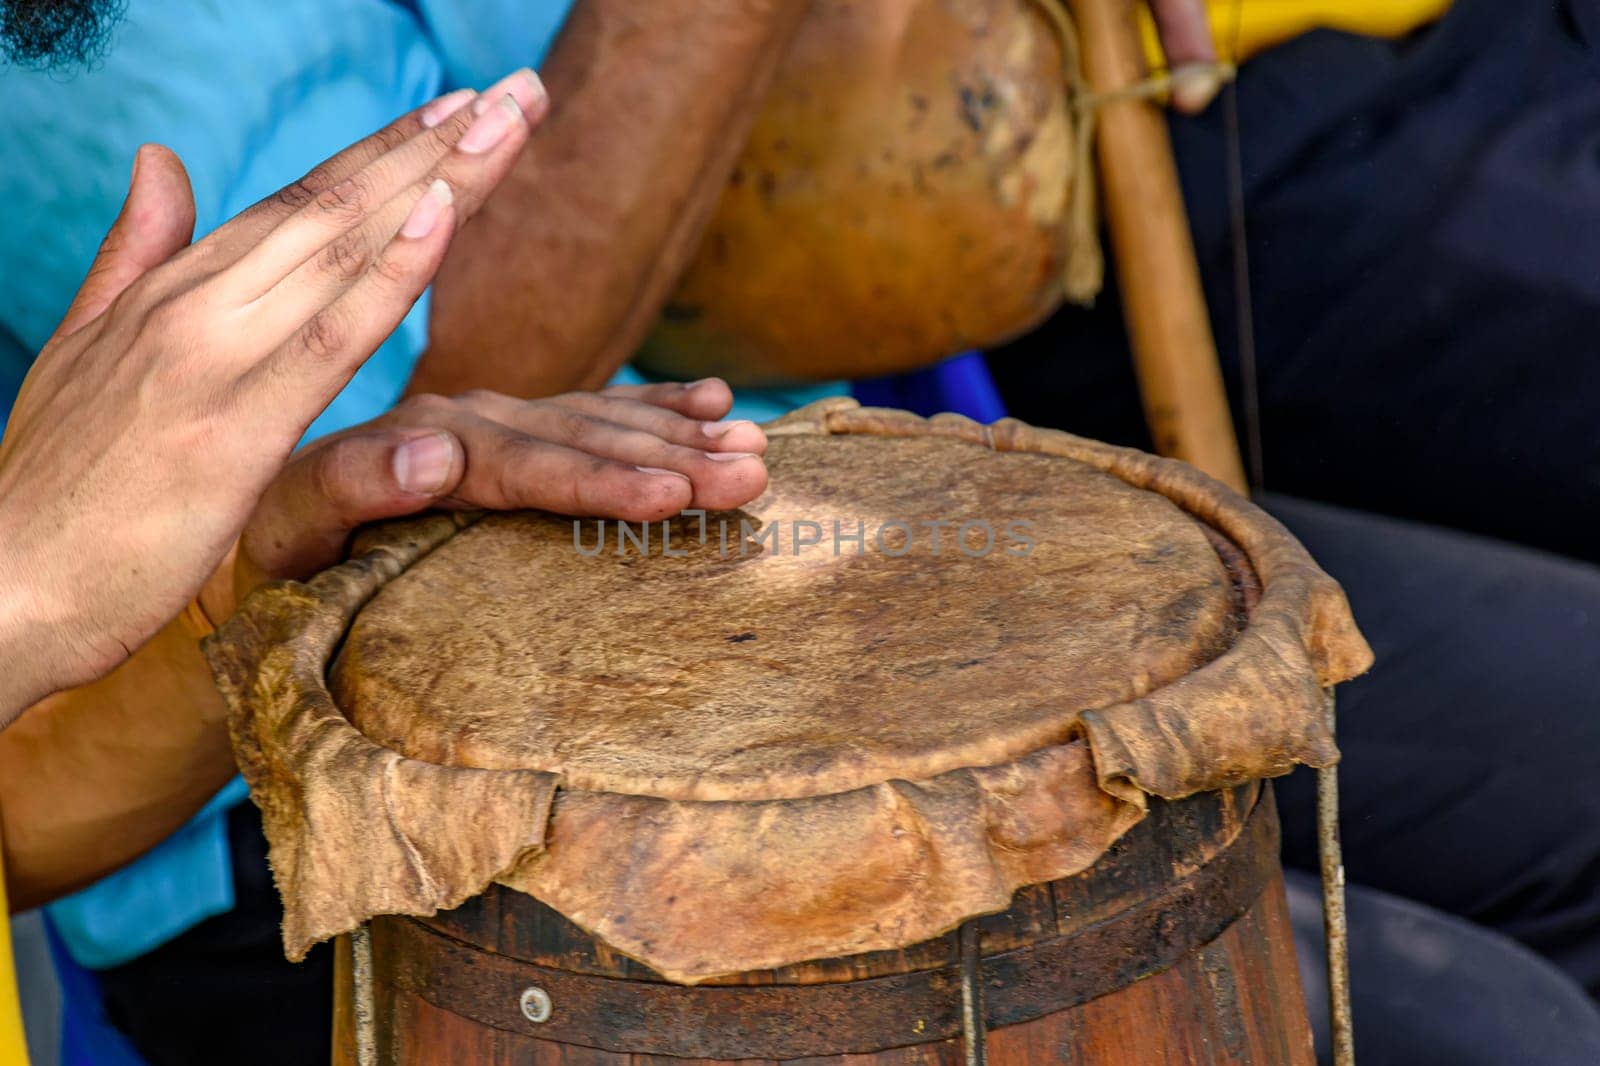 Ethnic drums used in religious festival in Lagoa Santa, Minas Gerais near the fire so that the leather stretch and adjust the sound of the instrument